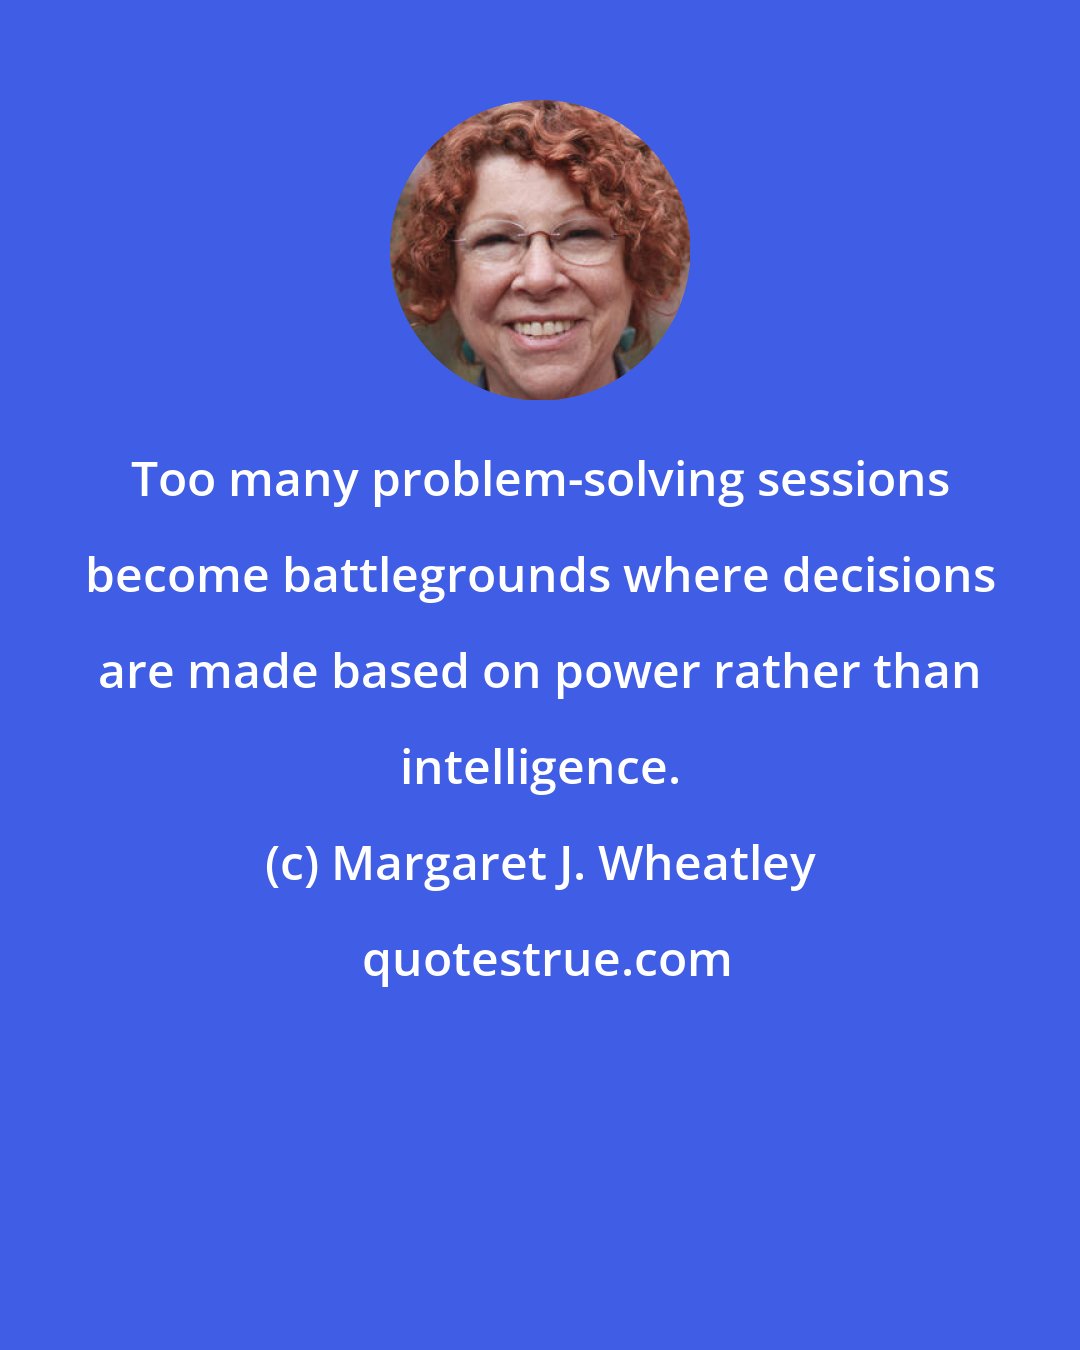 Margaret J. Wheatley: Too many problem-solving sessions become battlegrounds where decisions are made based on power rather than intelligence.